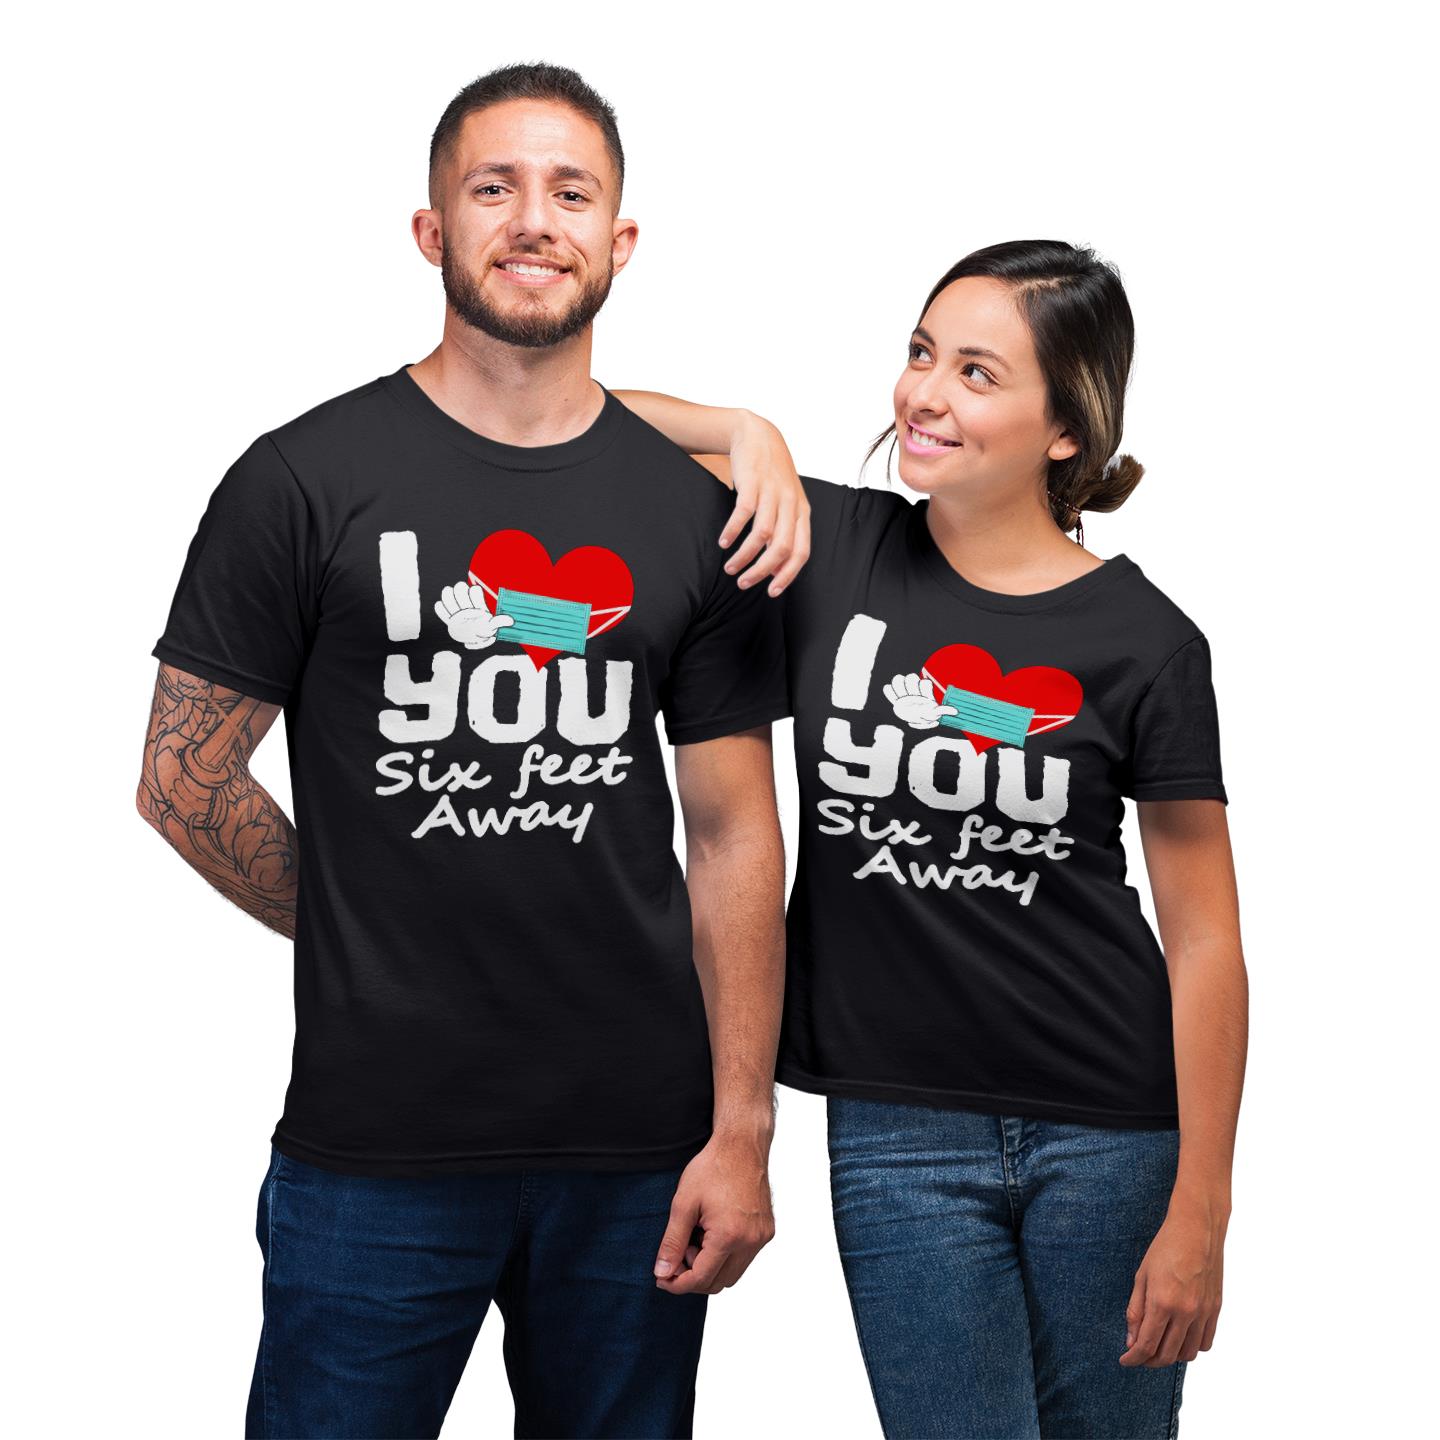 I Love You But Six Feet Away Funny Shirt For Couples Lover Matching T-shirt